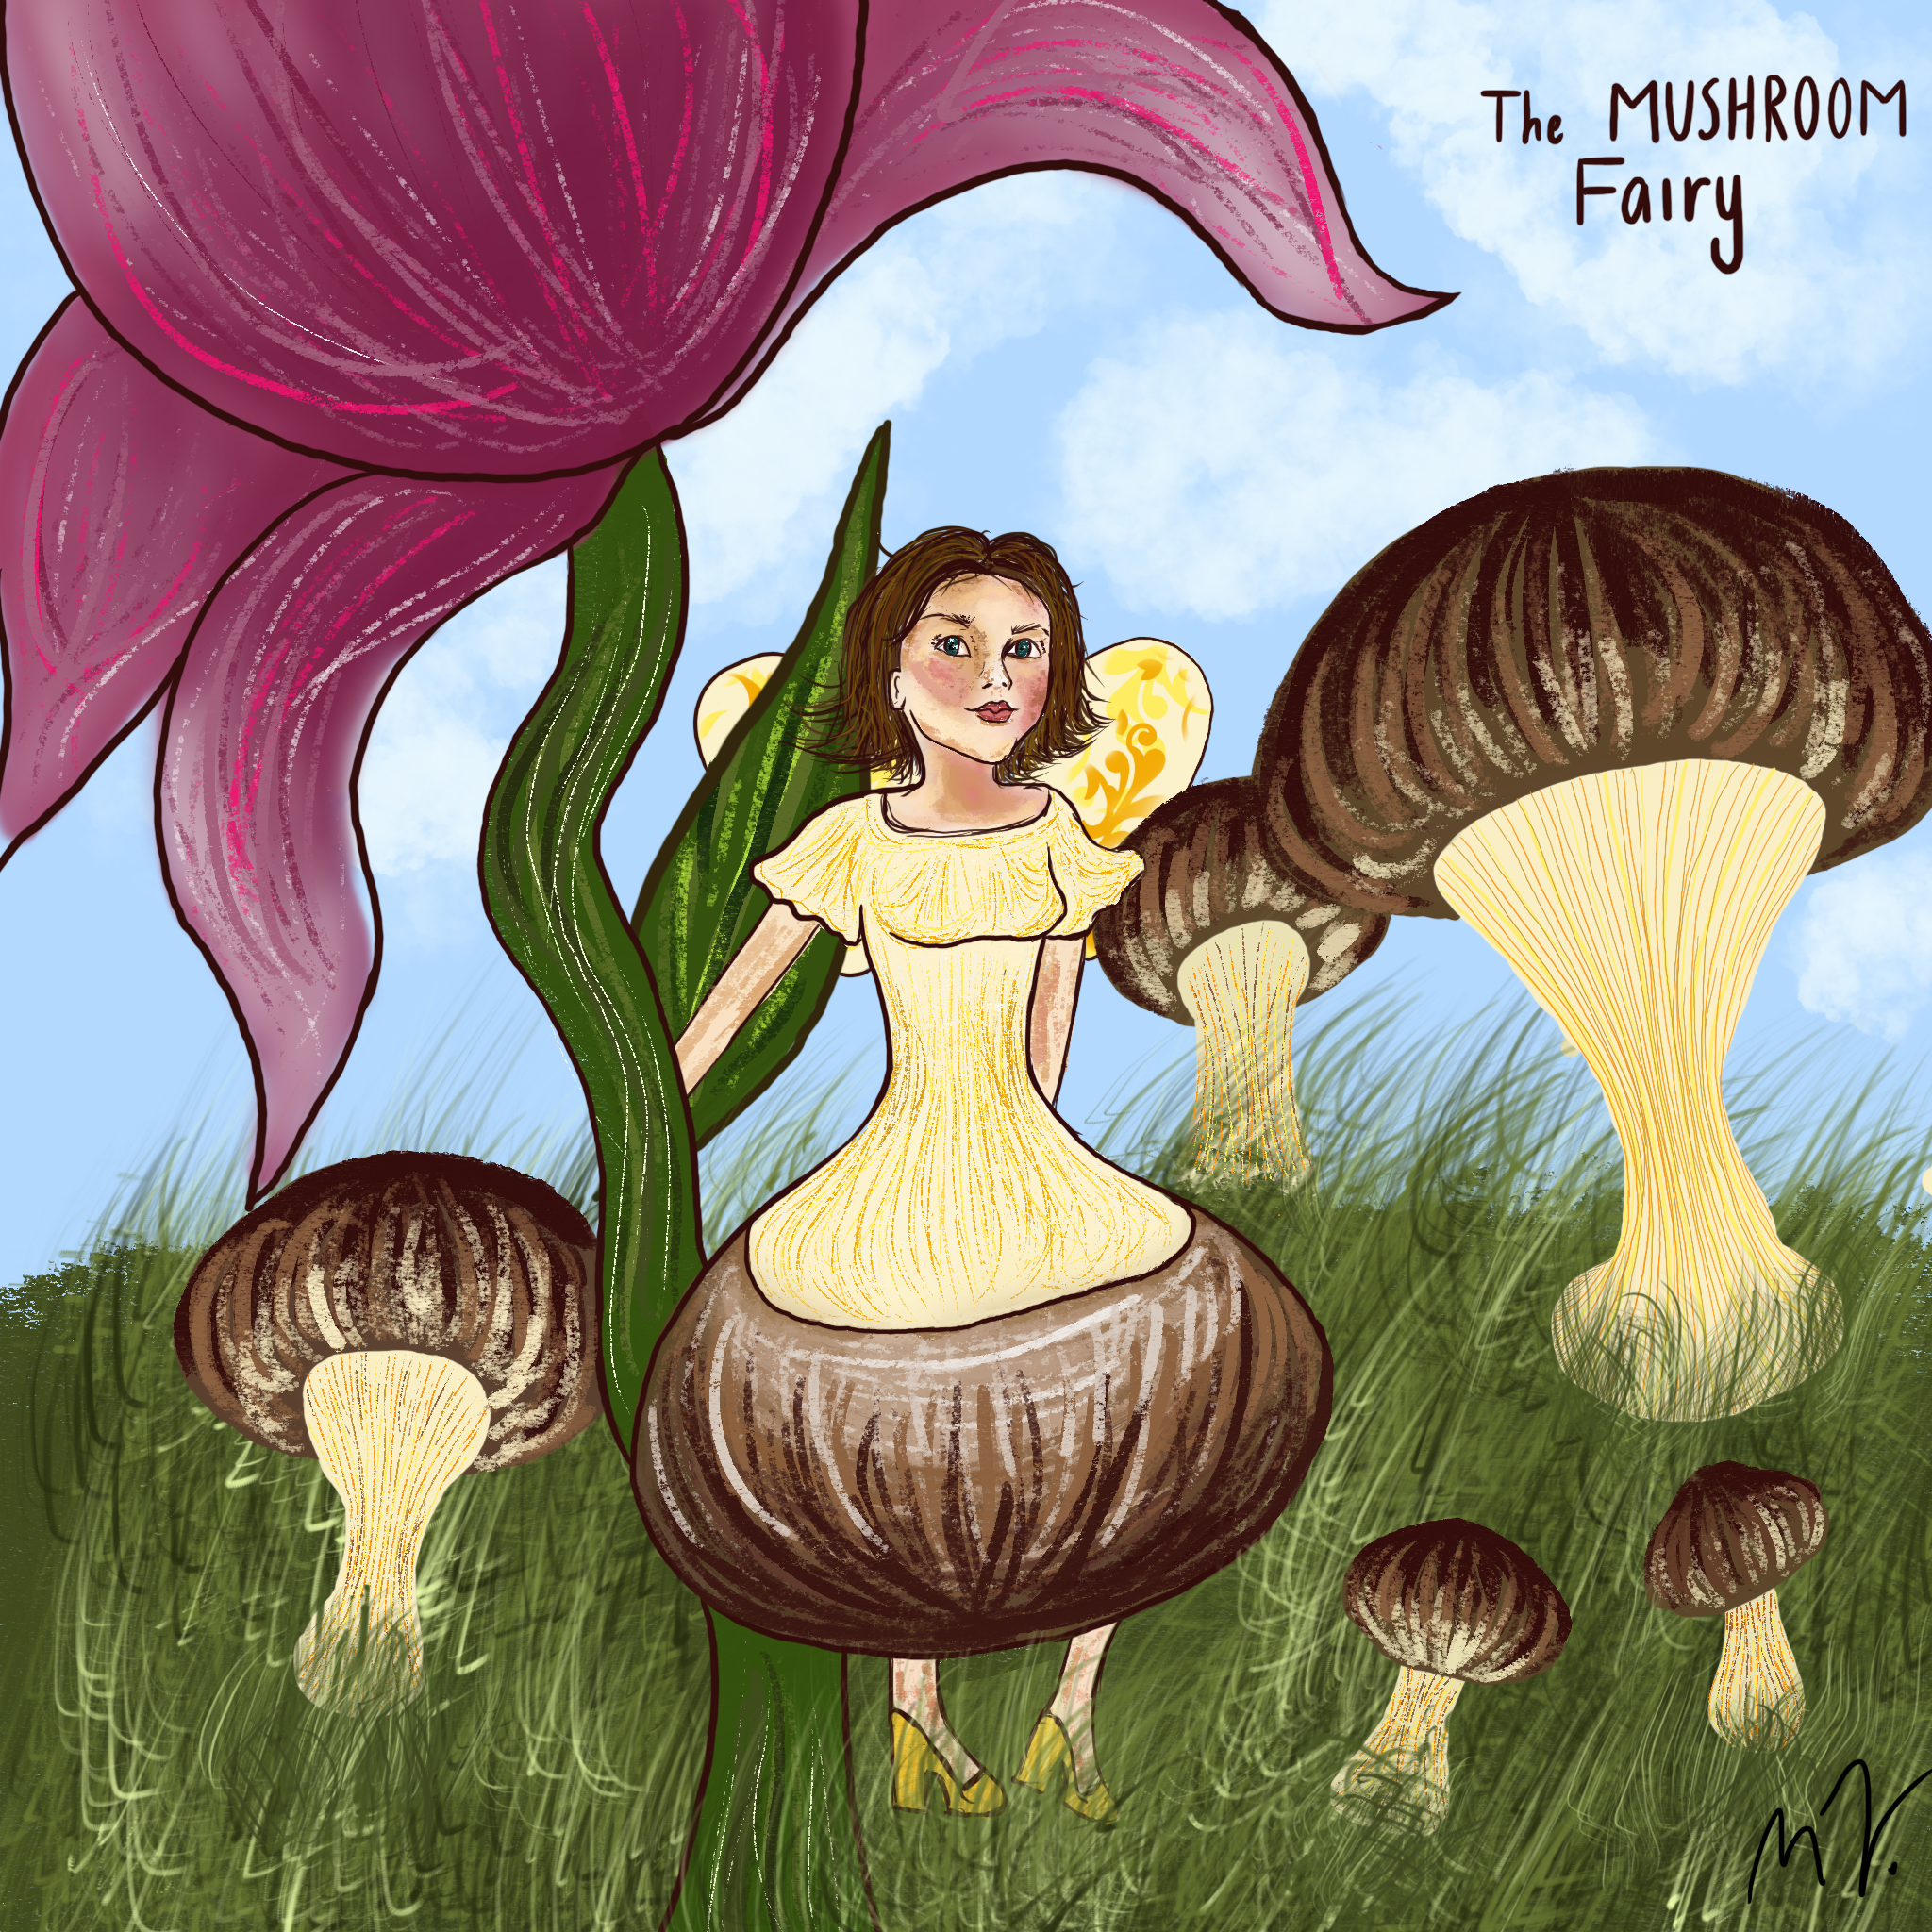 A fairy wearing a yellow dress just vibing around some mushrooms and a pink rose